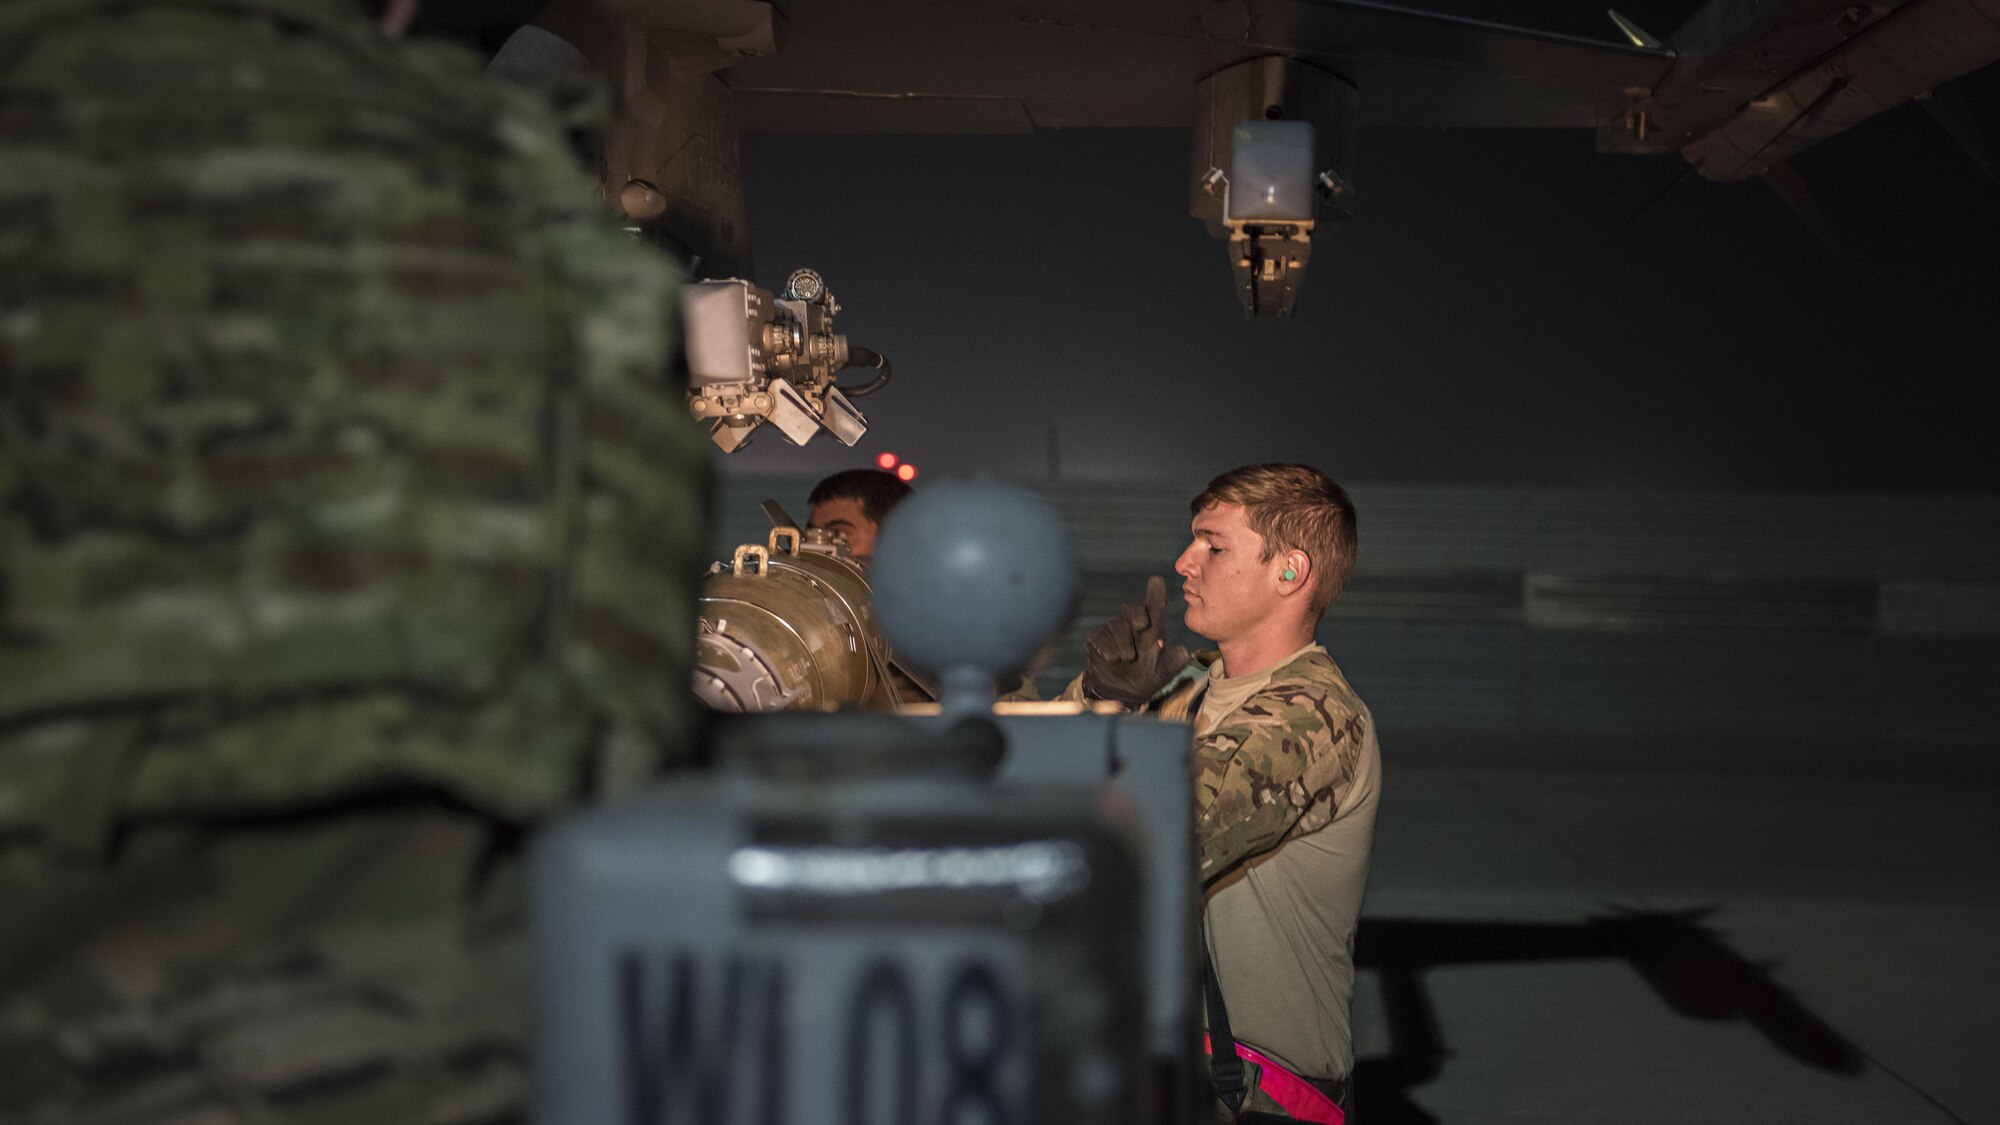 Staff Sgt. James Freeman, 455th Expeditionary Aircraft Maintenance Squadron weapons load crew chief, loads munitions onto an F-16 Fighting Falcon Nov. 15, 2016 at Bagram Airfield, Afghanistan. The F-16 employs the use of precision munitions to limit collateral damage on the battlefield. (U.S. Air Force photo by Staff Sgt. Katherine Spessa)
